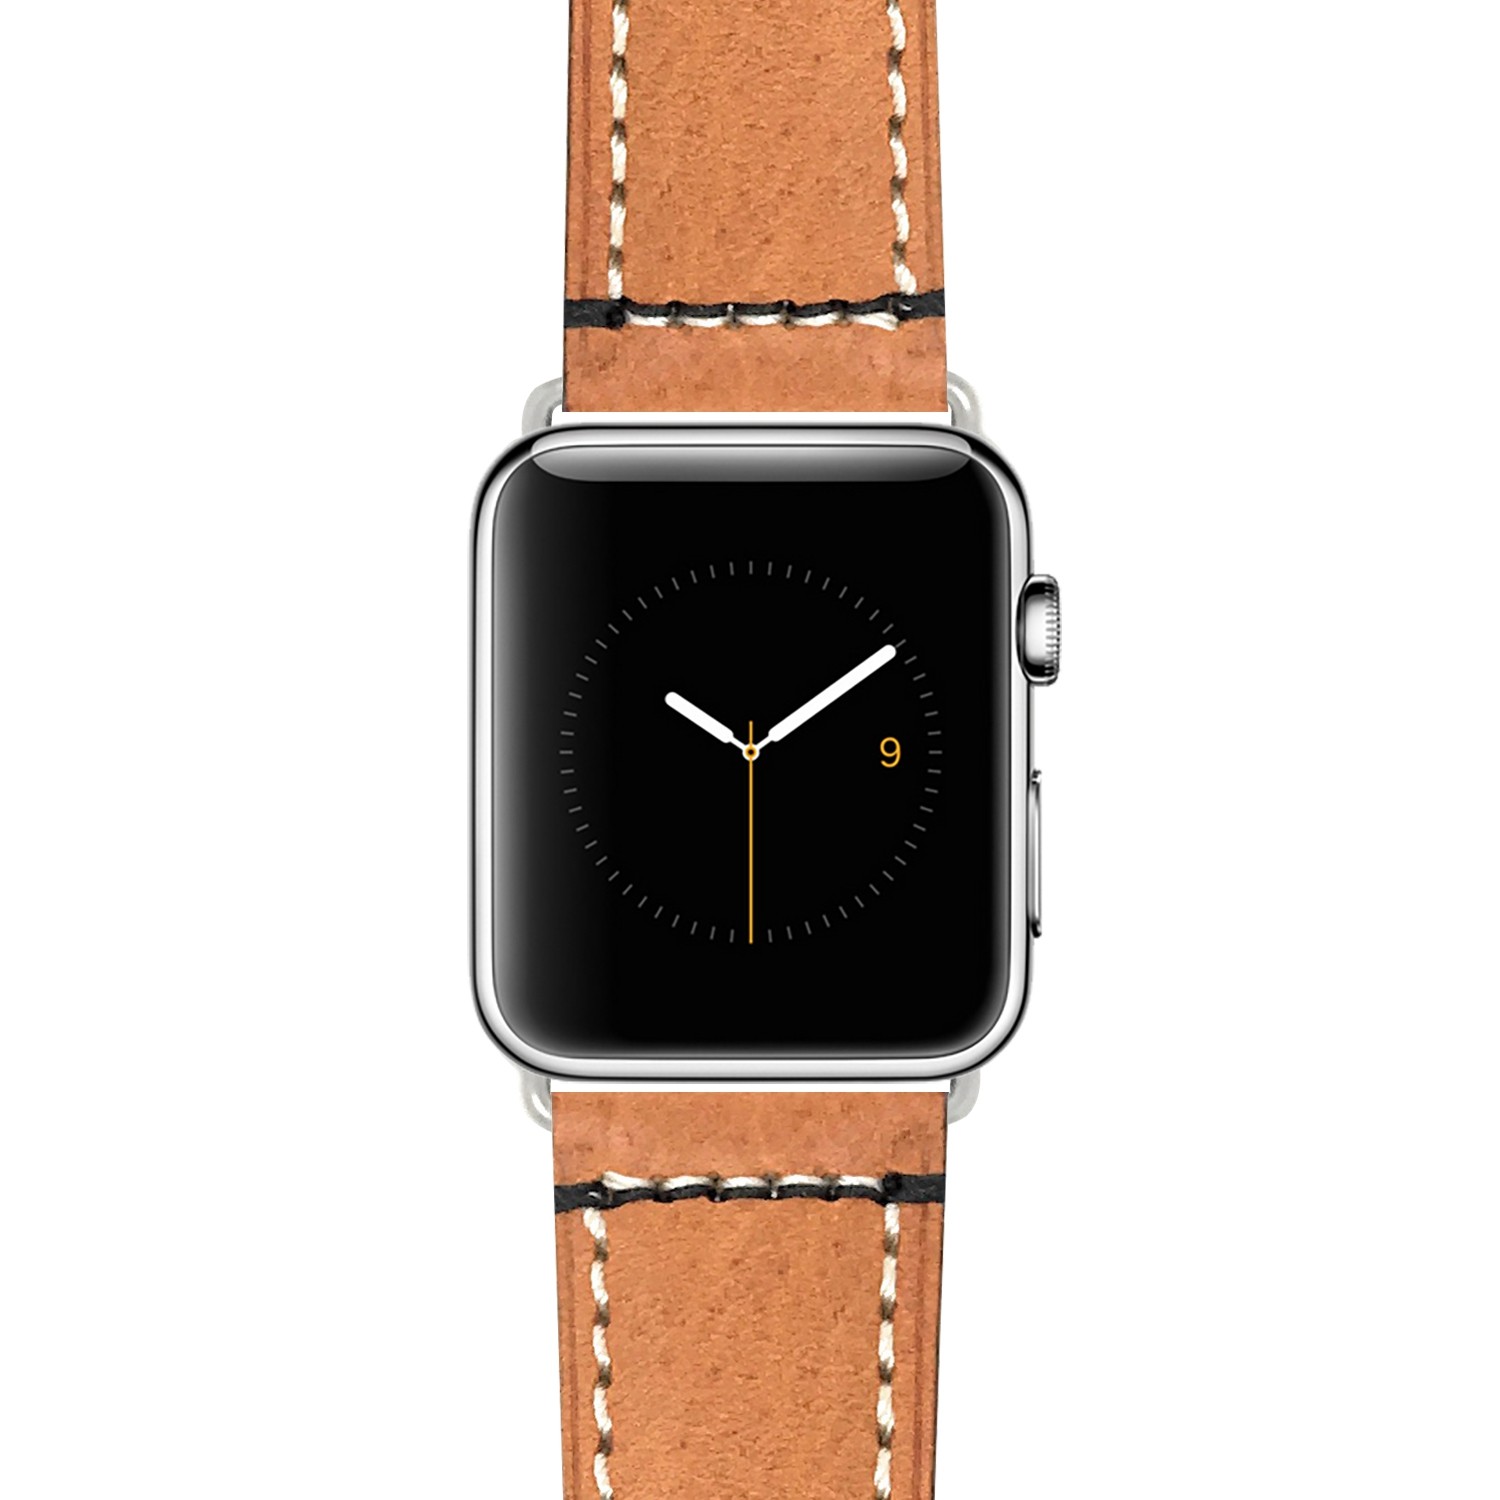 Tan, Italian Leather 42mm Apple Watch Strap Band, Double Stitching, Stainless Steel Buckle, Fits Series 1, 2 & 3